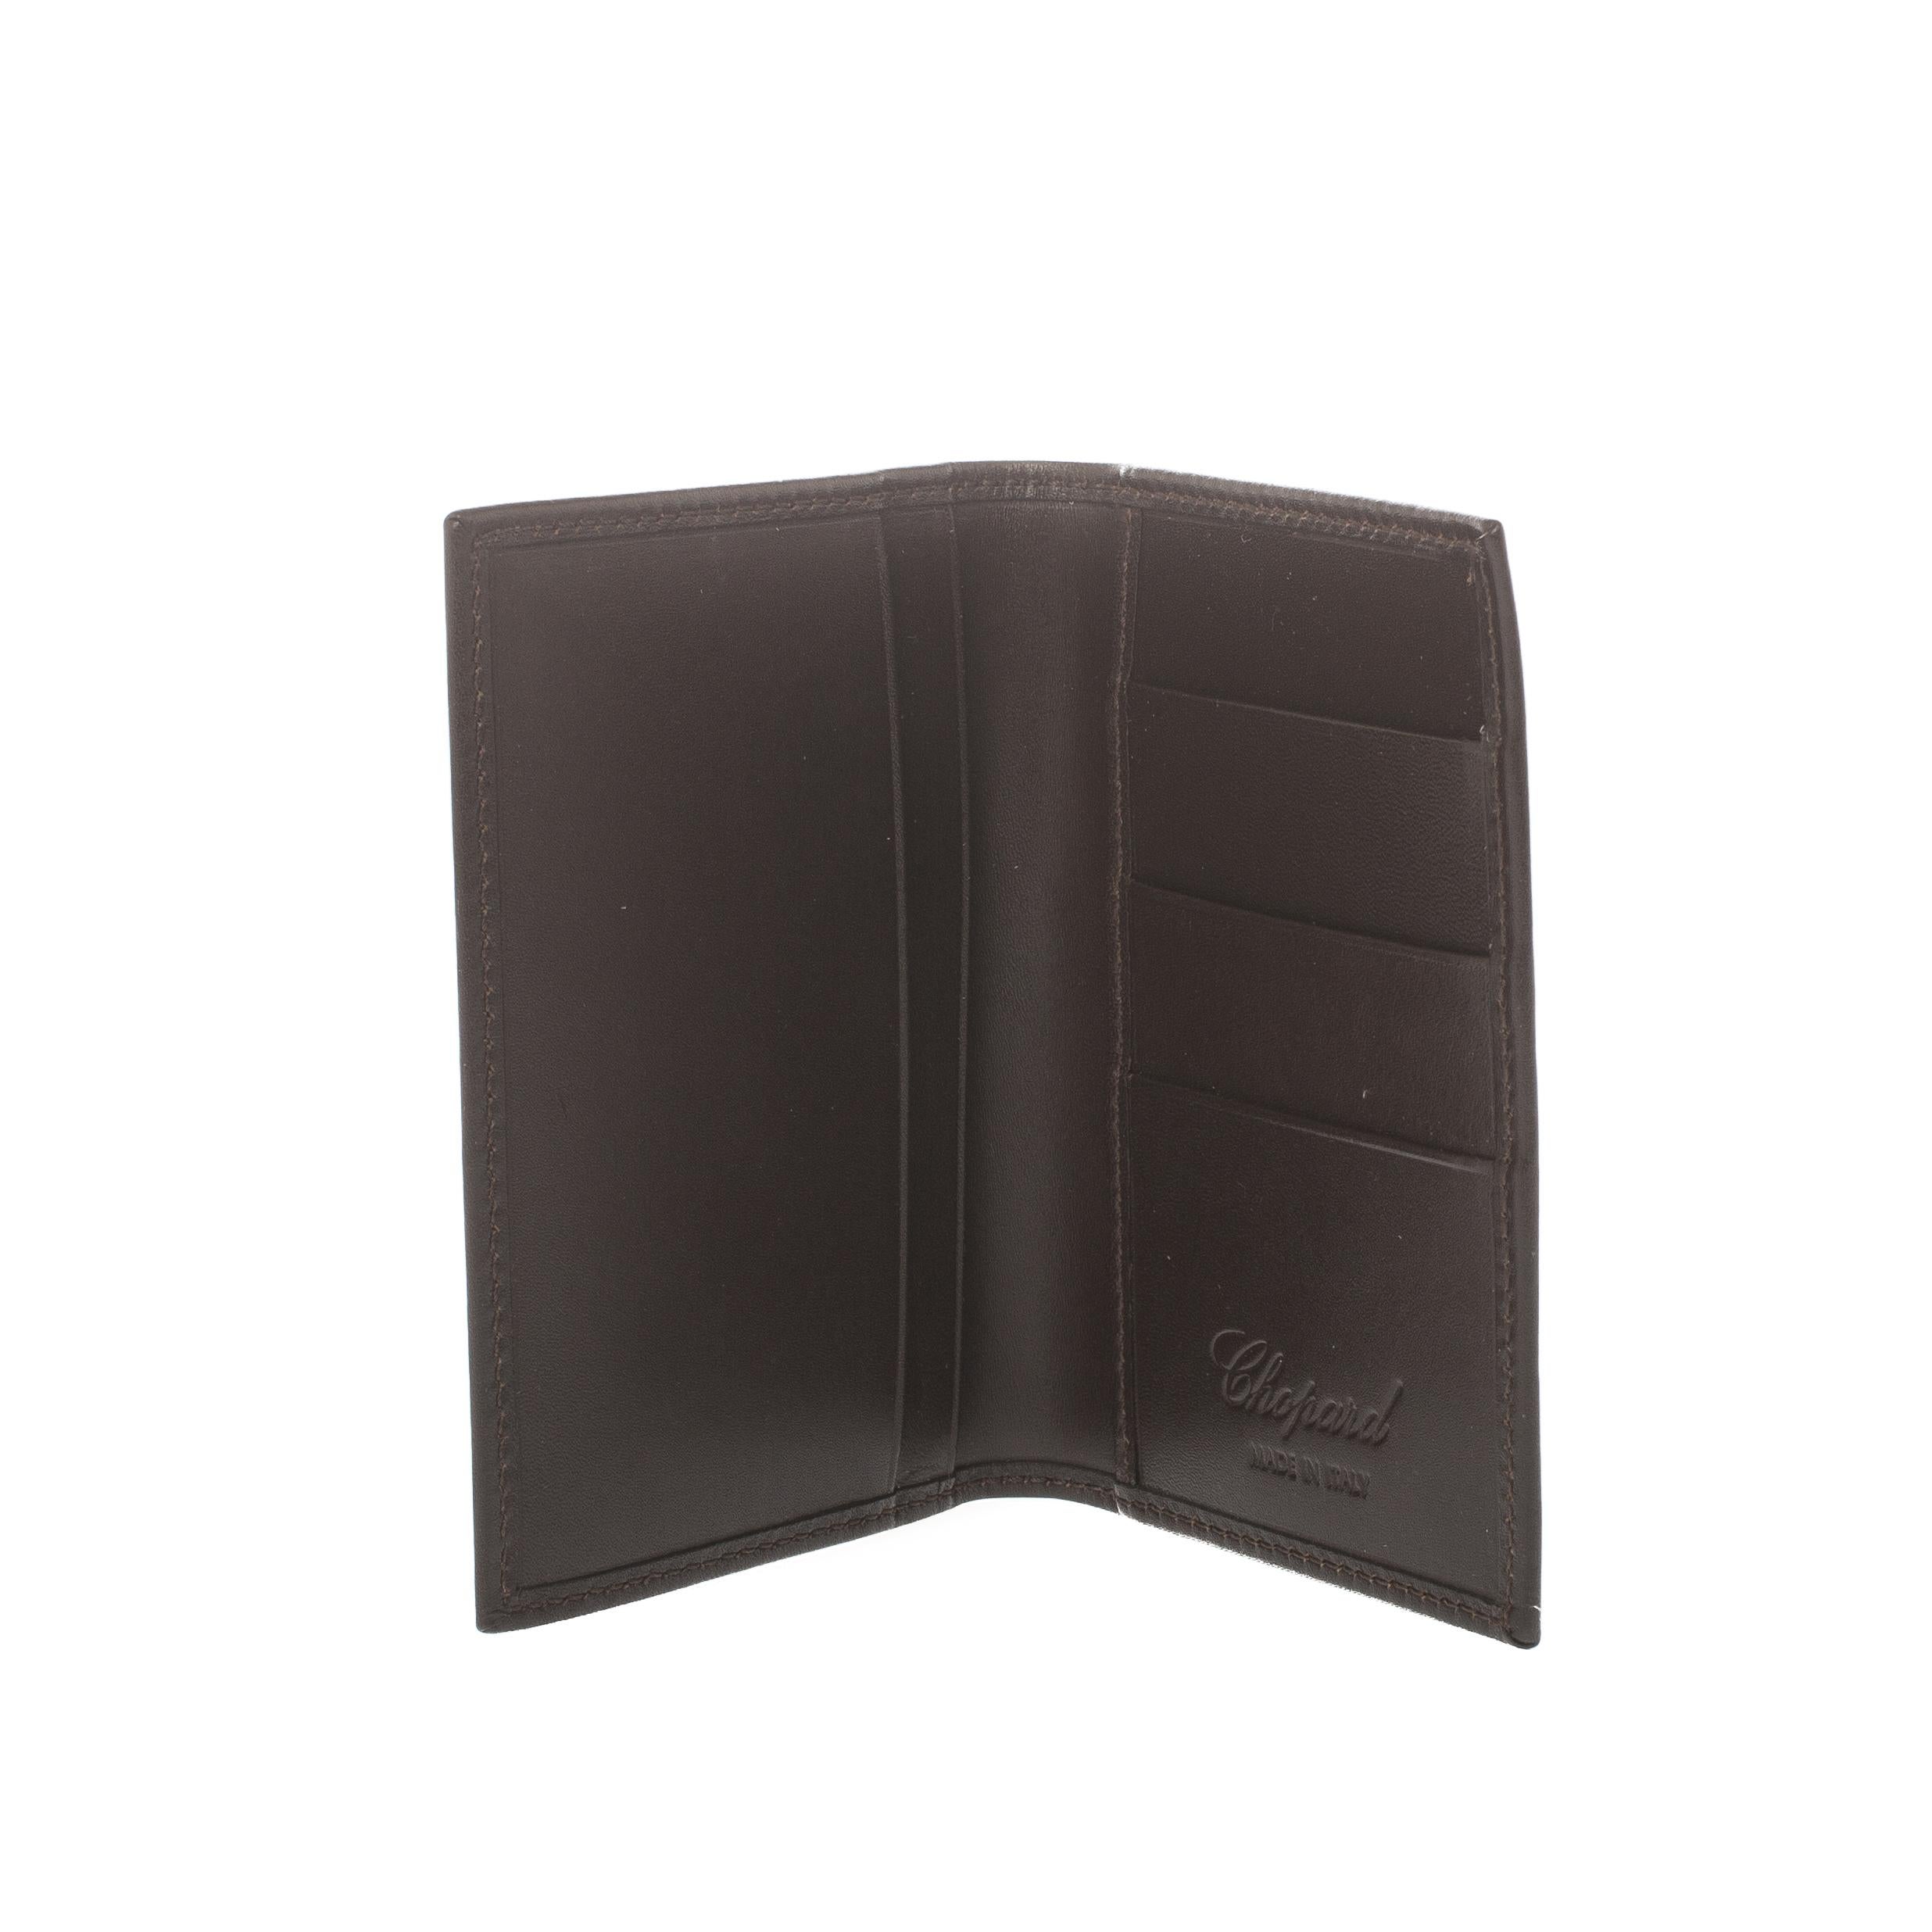 Store your essentials effortlessly in this sturdy leather wallet. Styled as a bi-fold this suave creation is from the house of Chopard. Featuring a rich brown shade, this wallet is a stylish accessory.

Includes: Original Box

